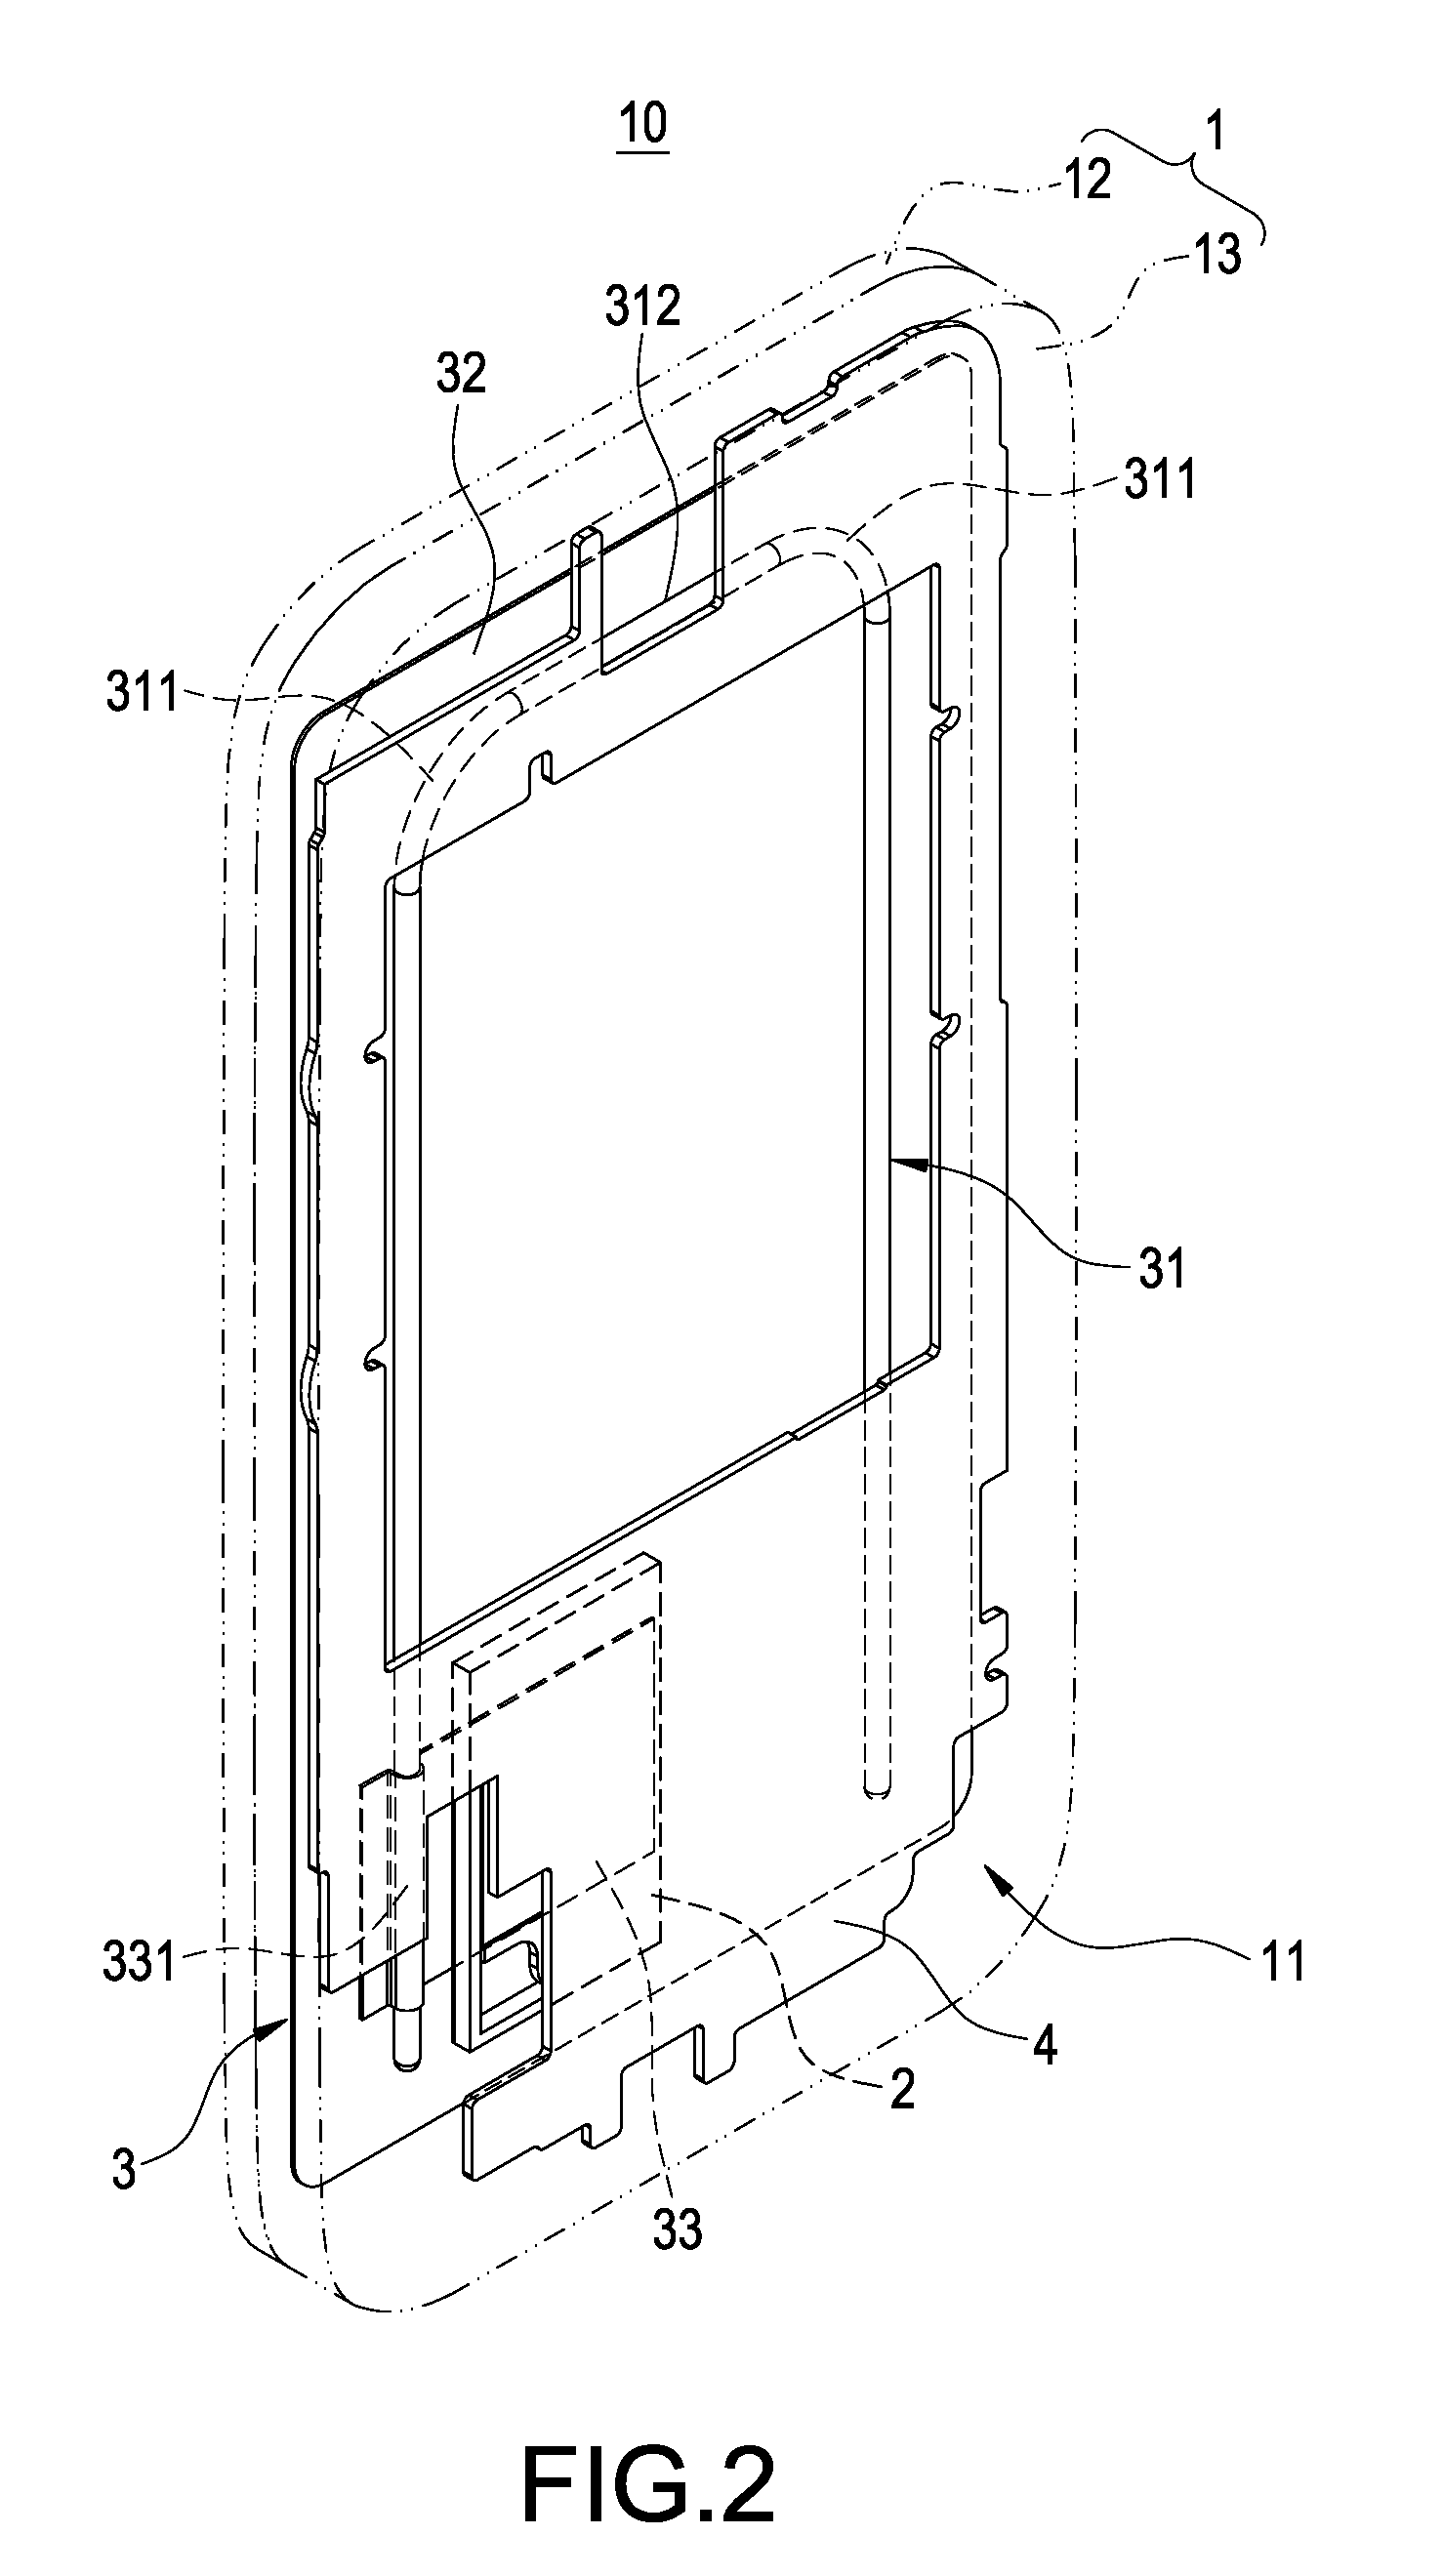 Handheld communication device with heat dissipating structure